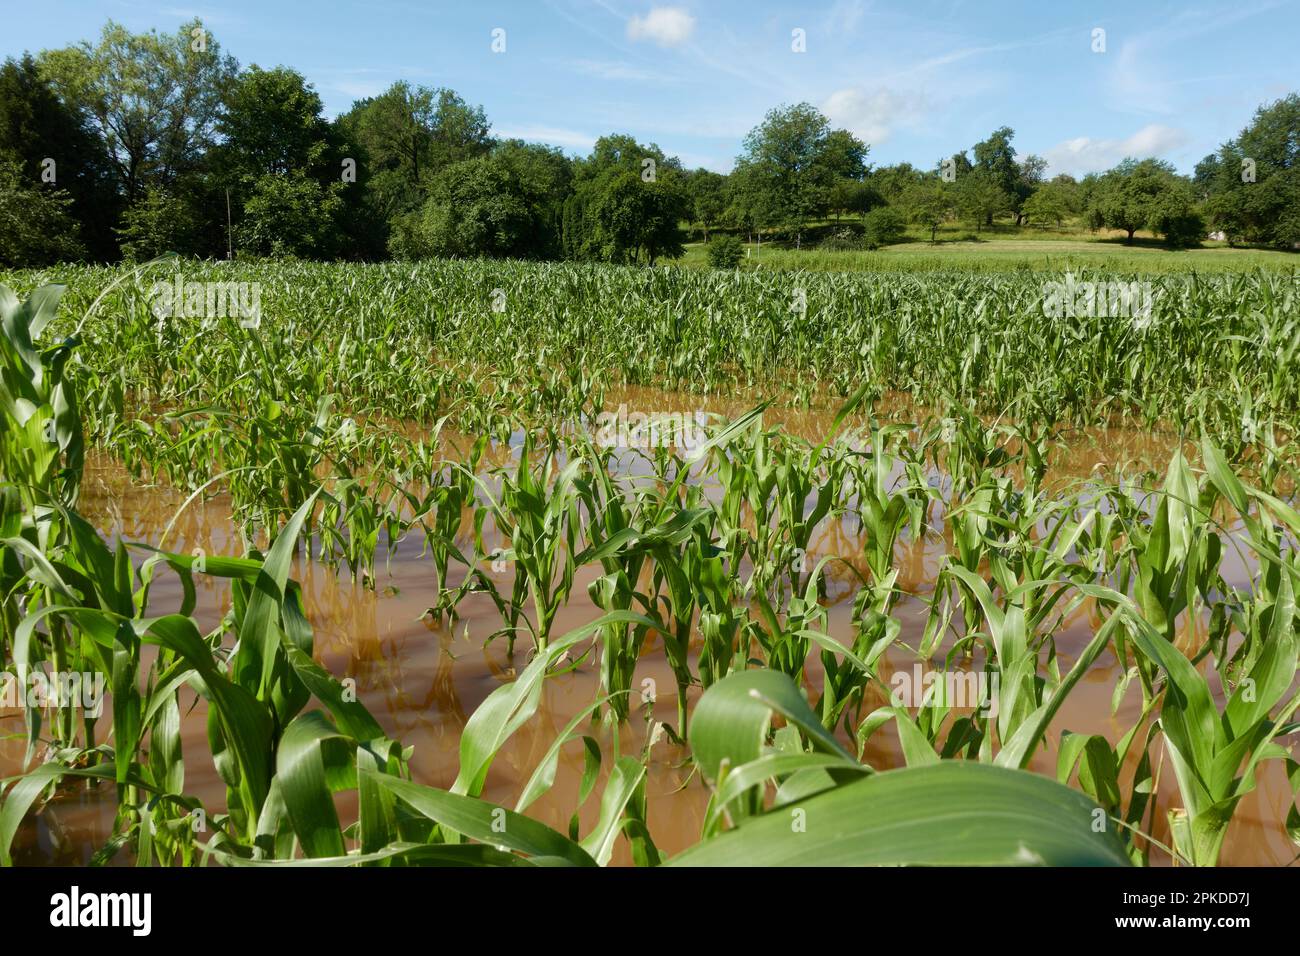 Flooded cornfield after storm surge. Green crop plants in brown water. Green tree line and blue sky. Stock Photo